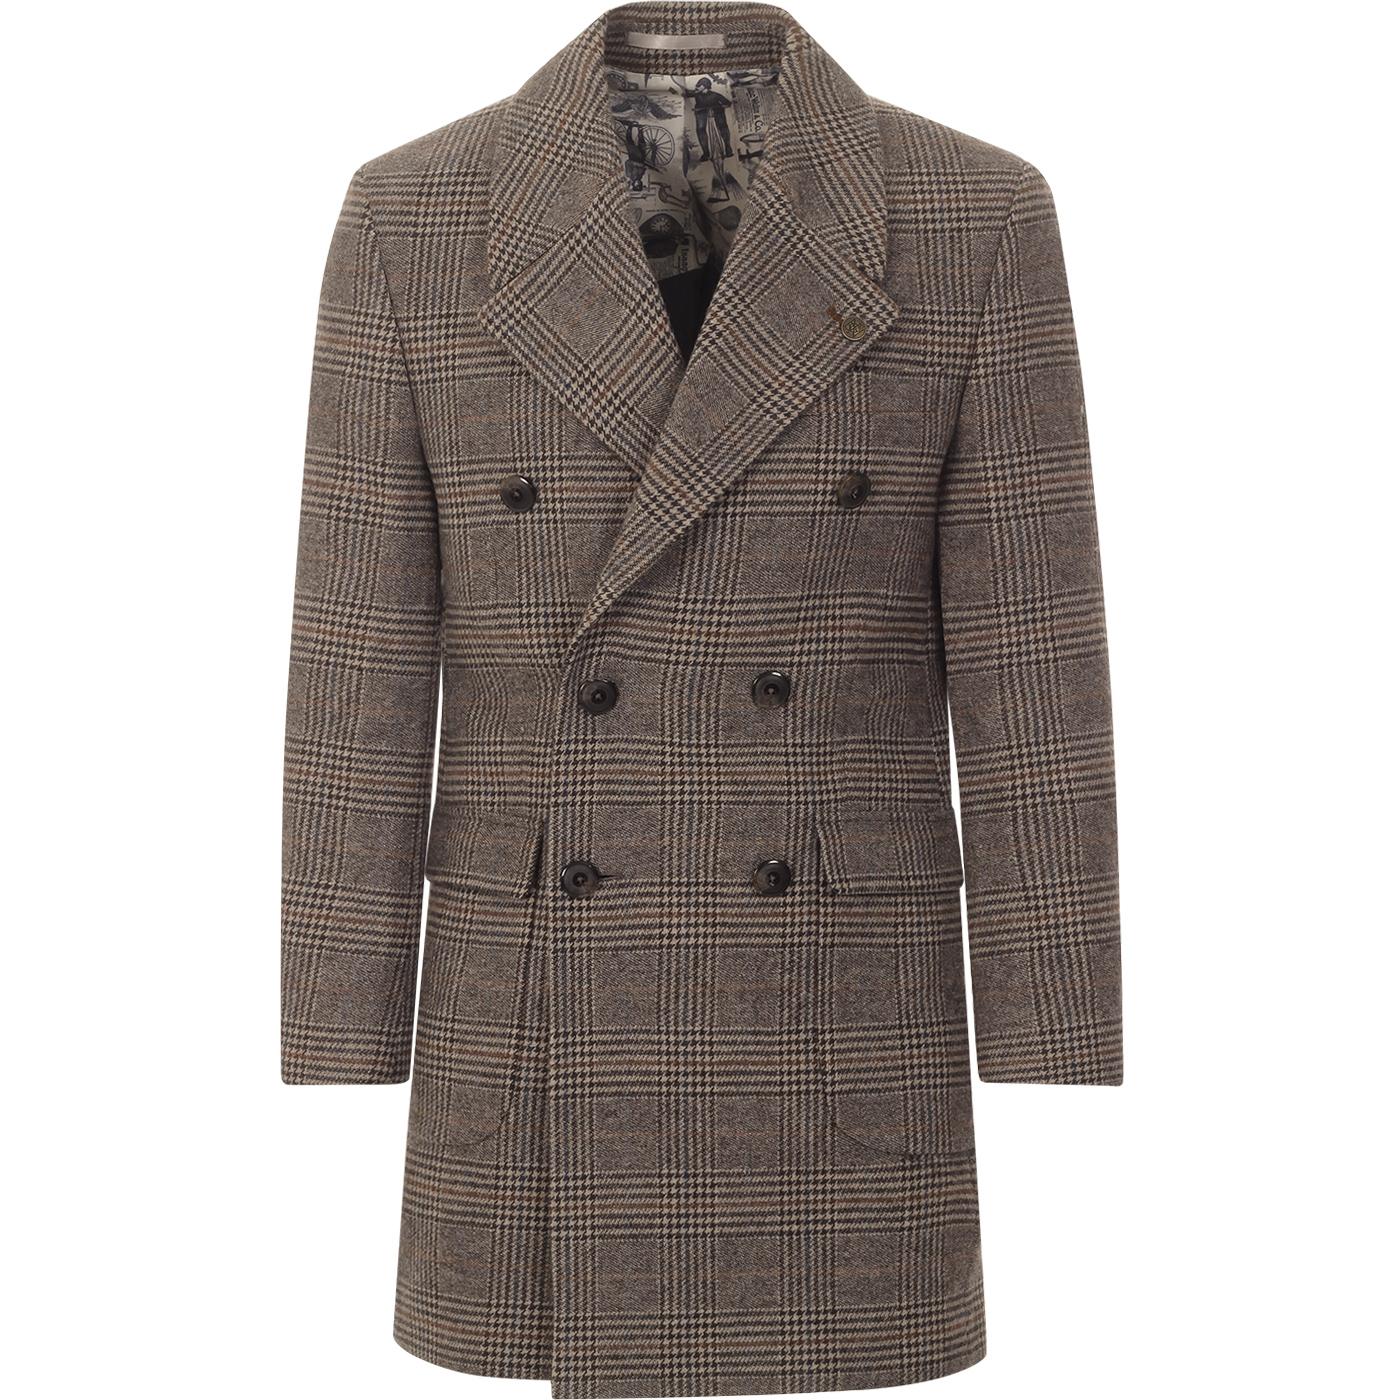 GIBSON LONDON Mod Double Breasted Check Overcoat